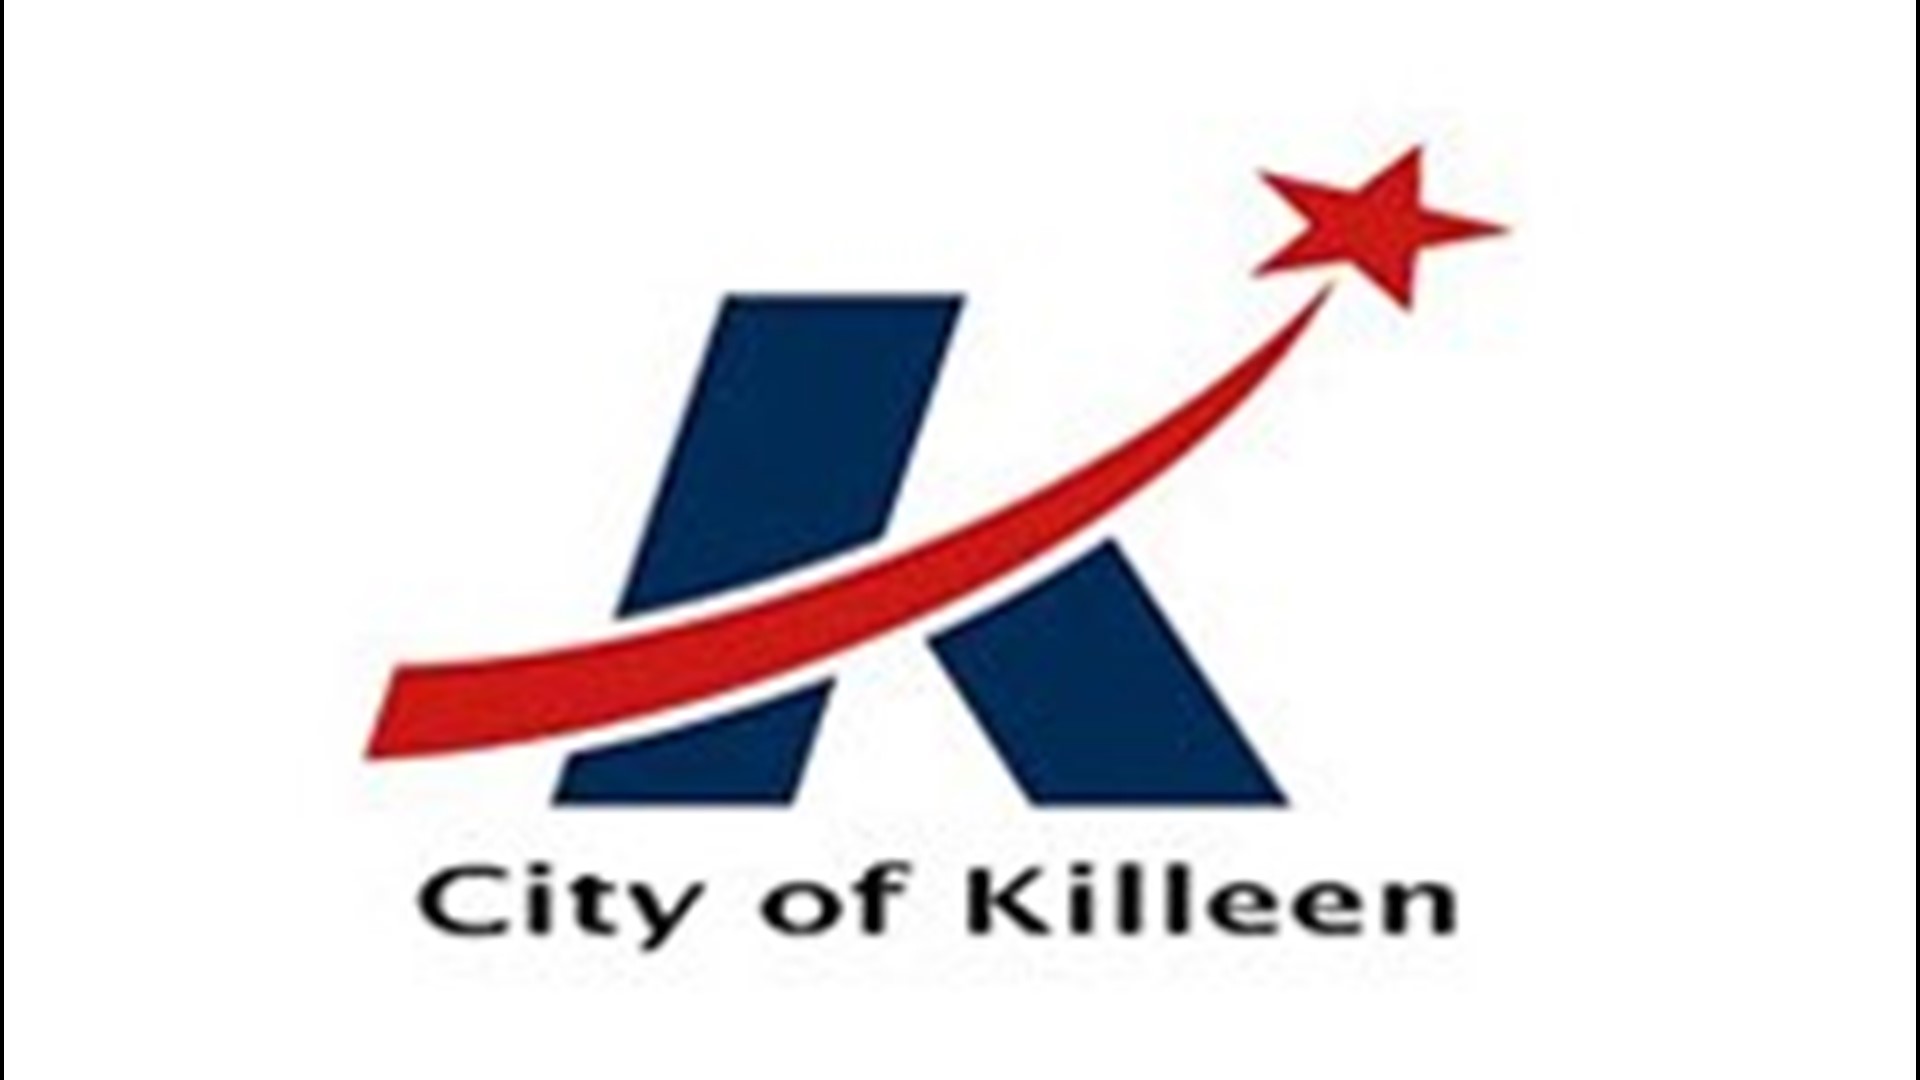 The Killeen City Council discussed different workshop items connected to the project, Tuesday.